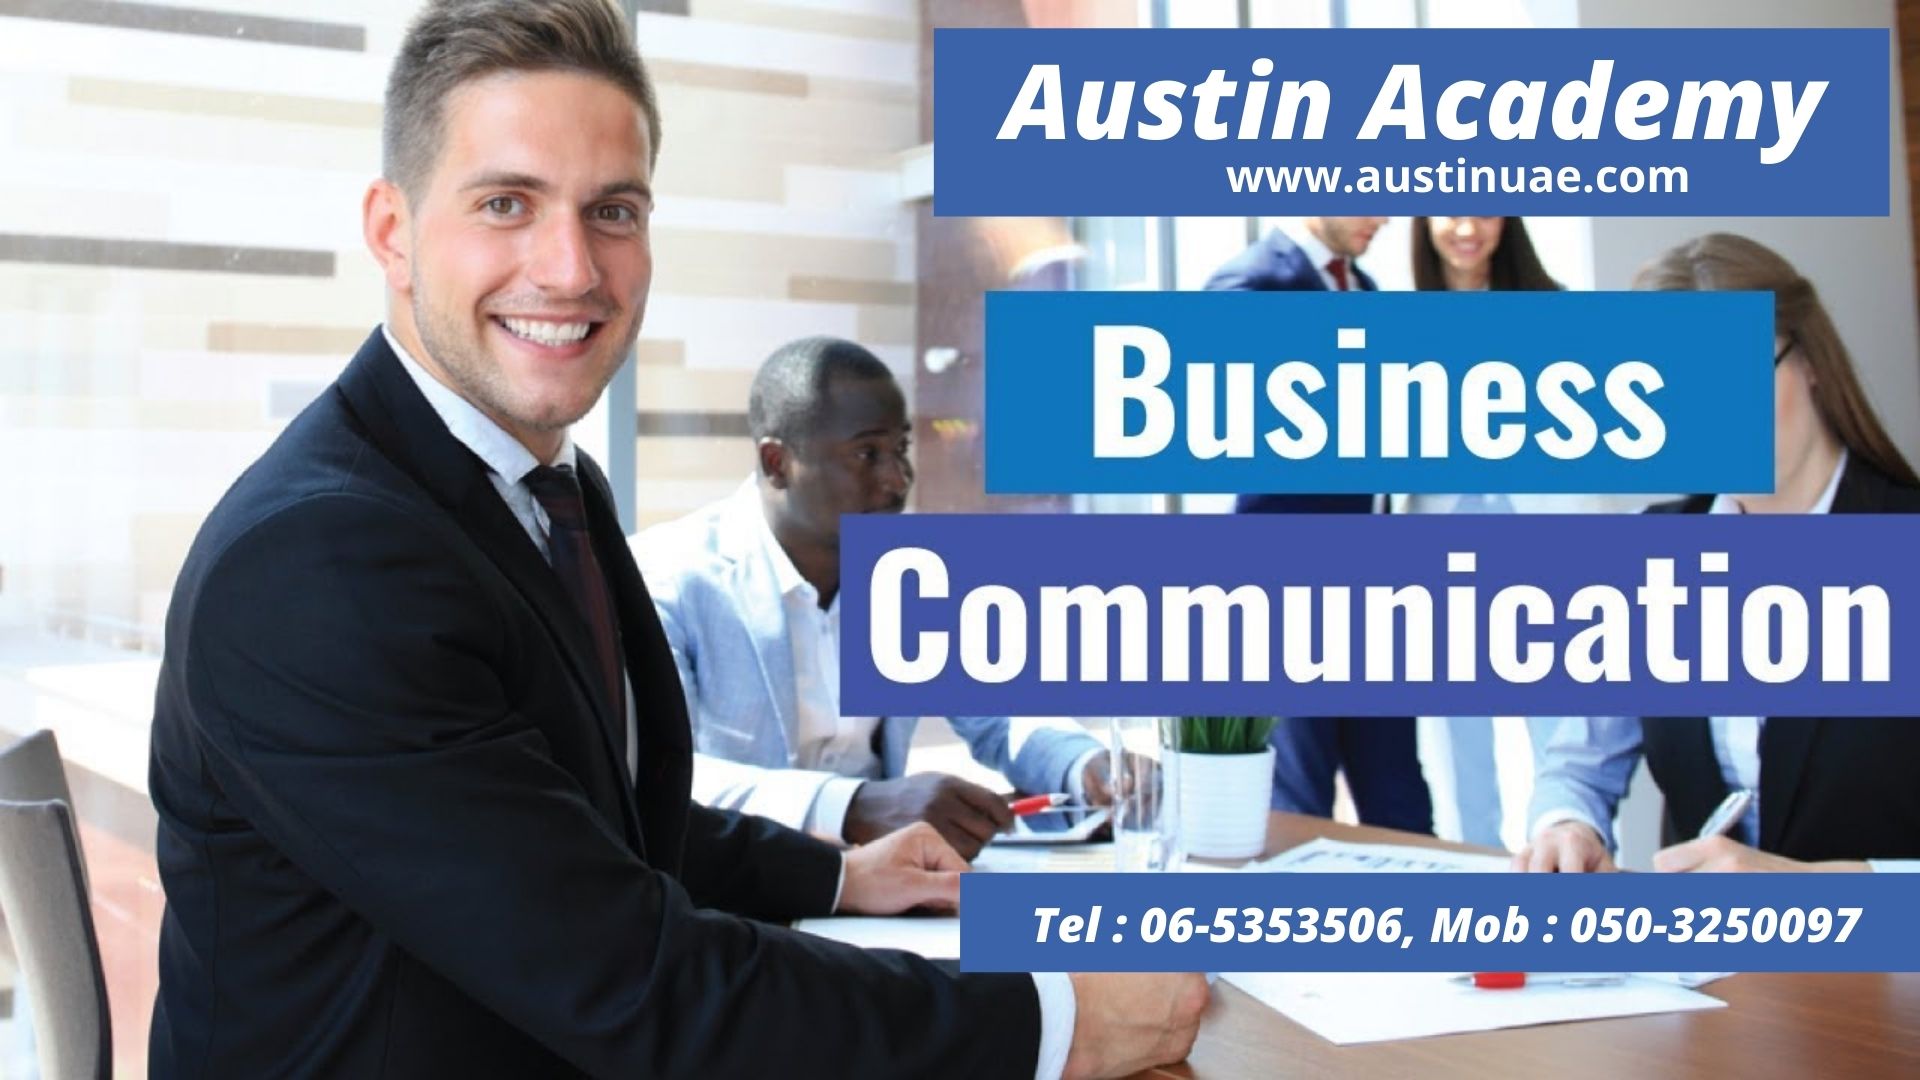 Business Communication Classes In Sharjah With Best Discount 0503250097